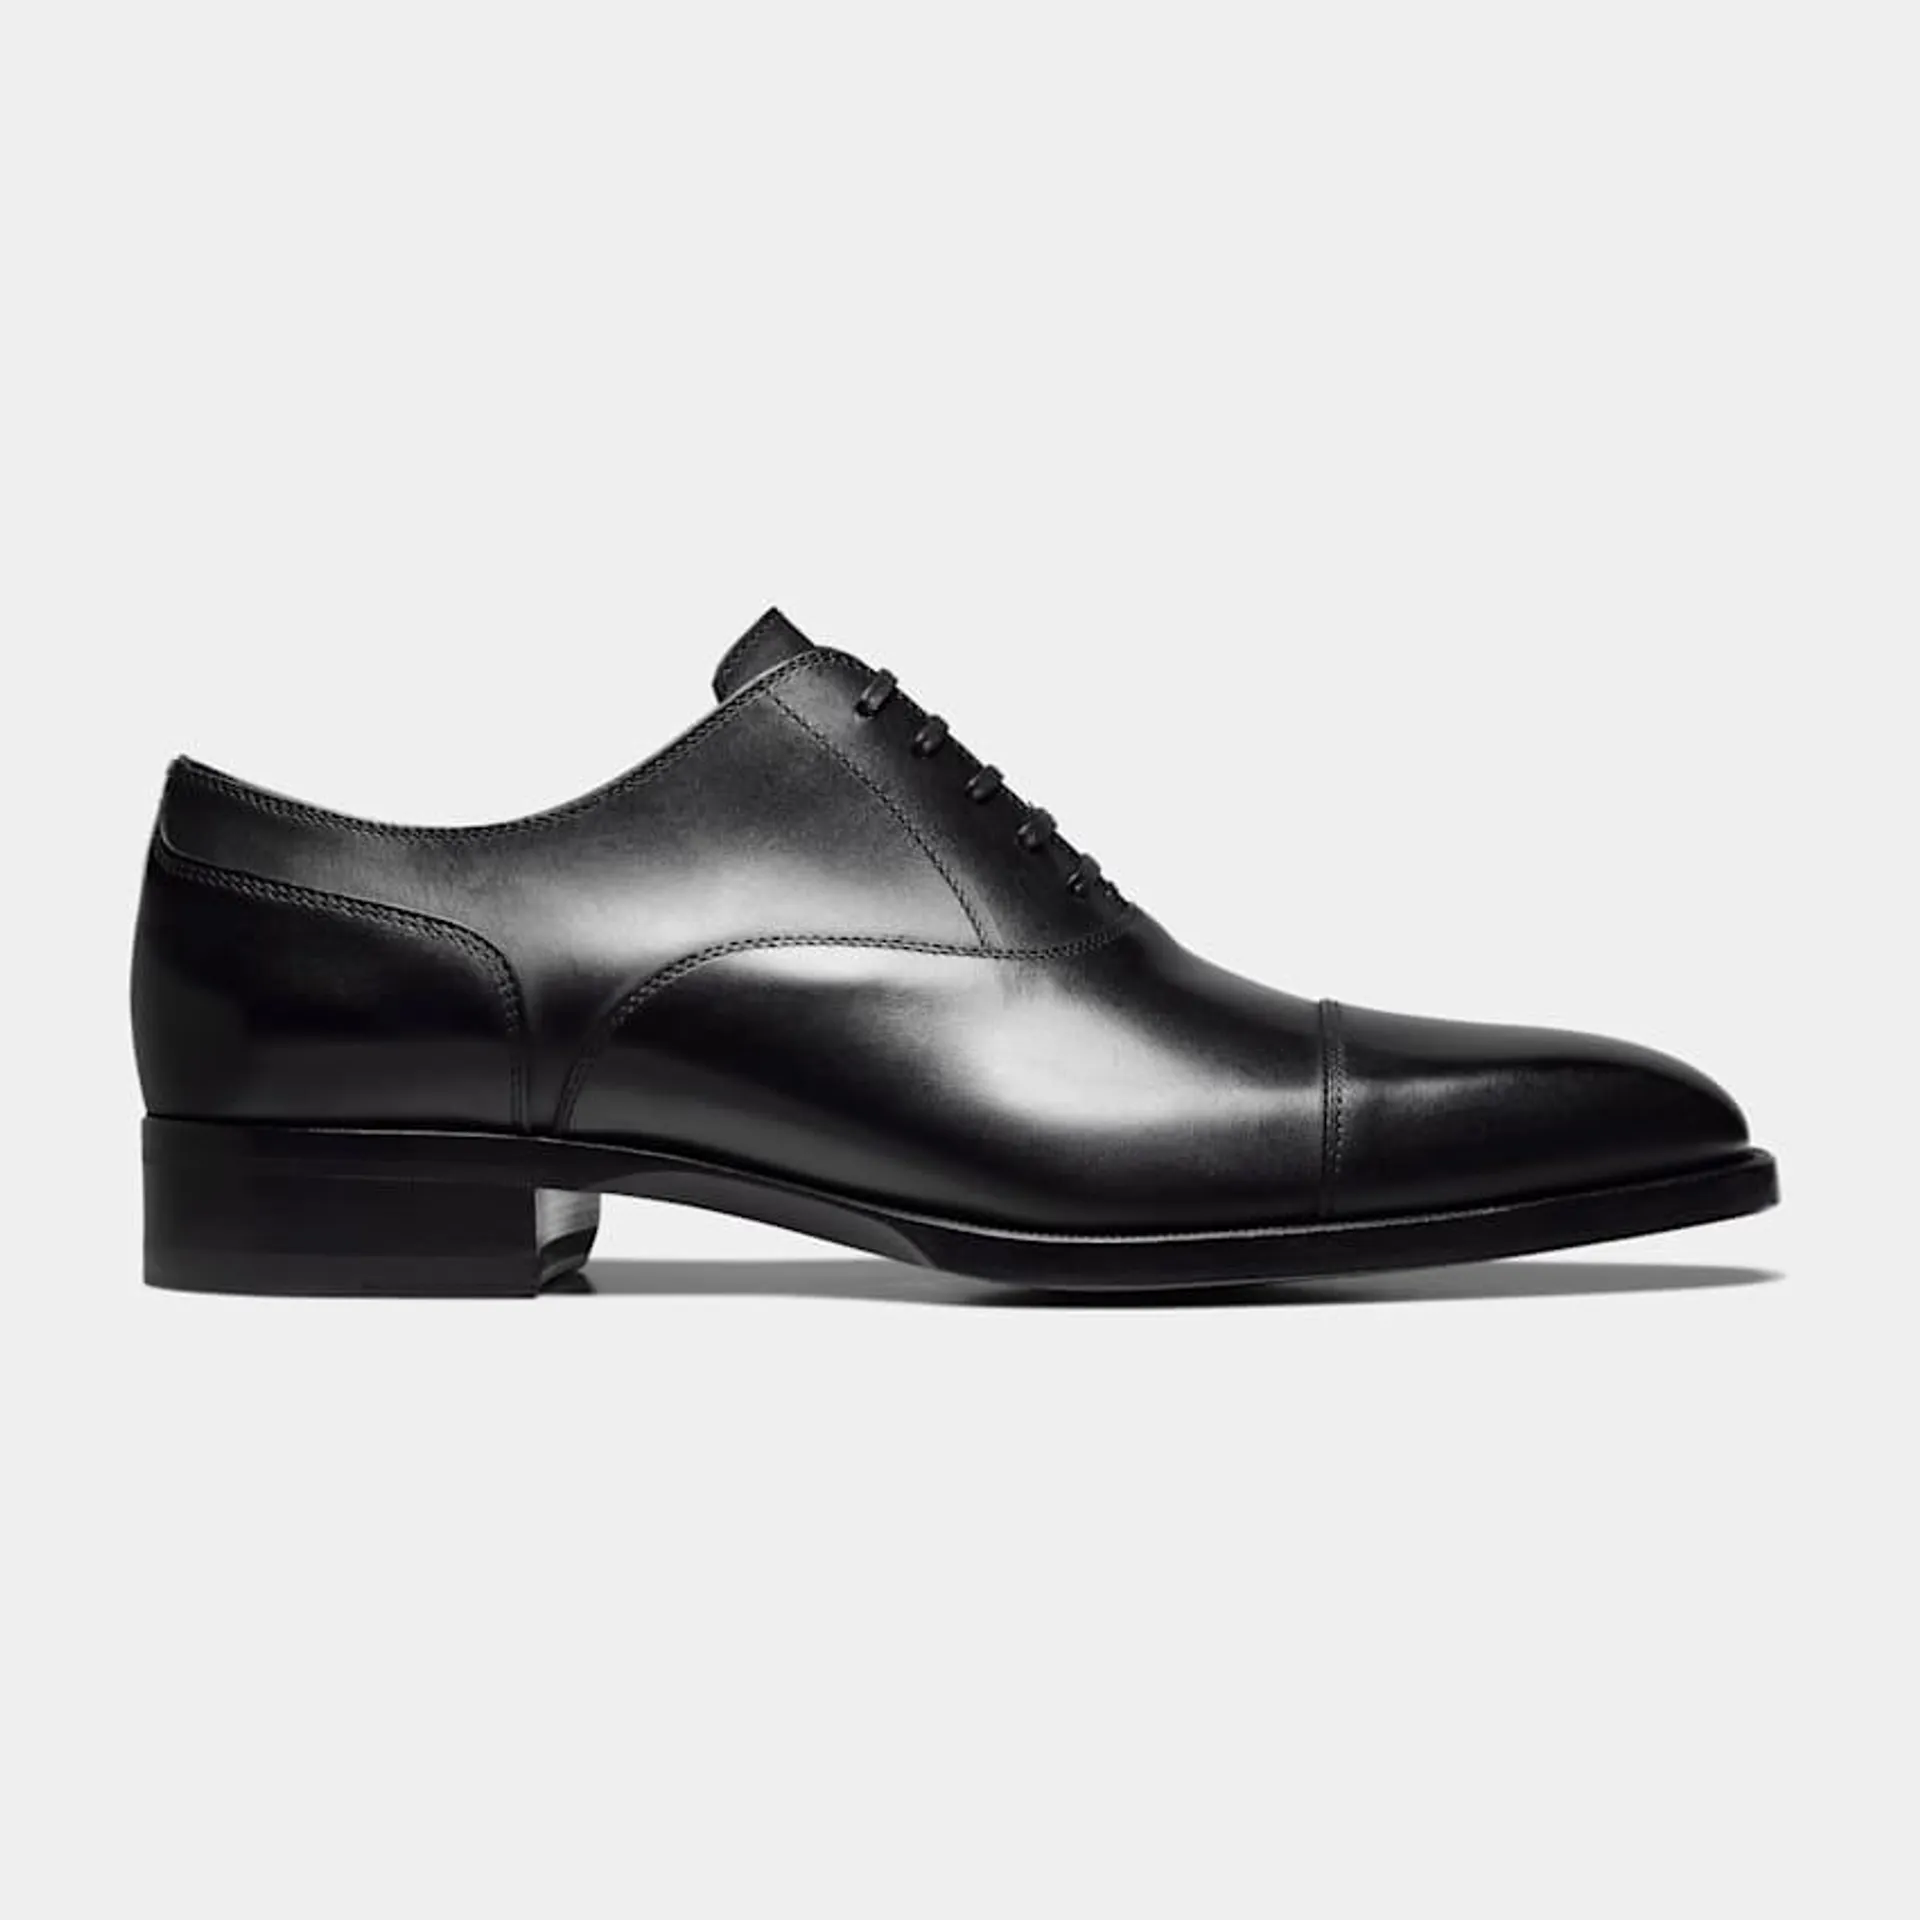 A classic pairing to formal suits, these timeless black Oxfords are crafted in Italy from supple Italian calf leather in a Blake stitch, and feature full leather lining and sole.